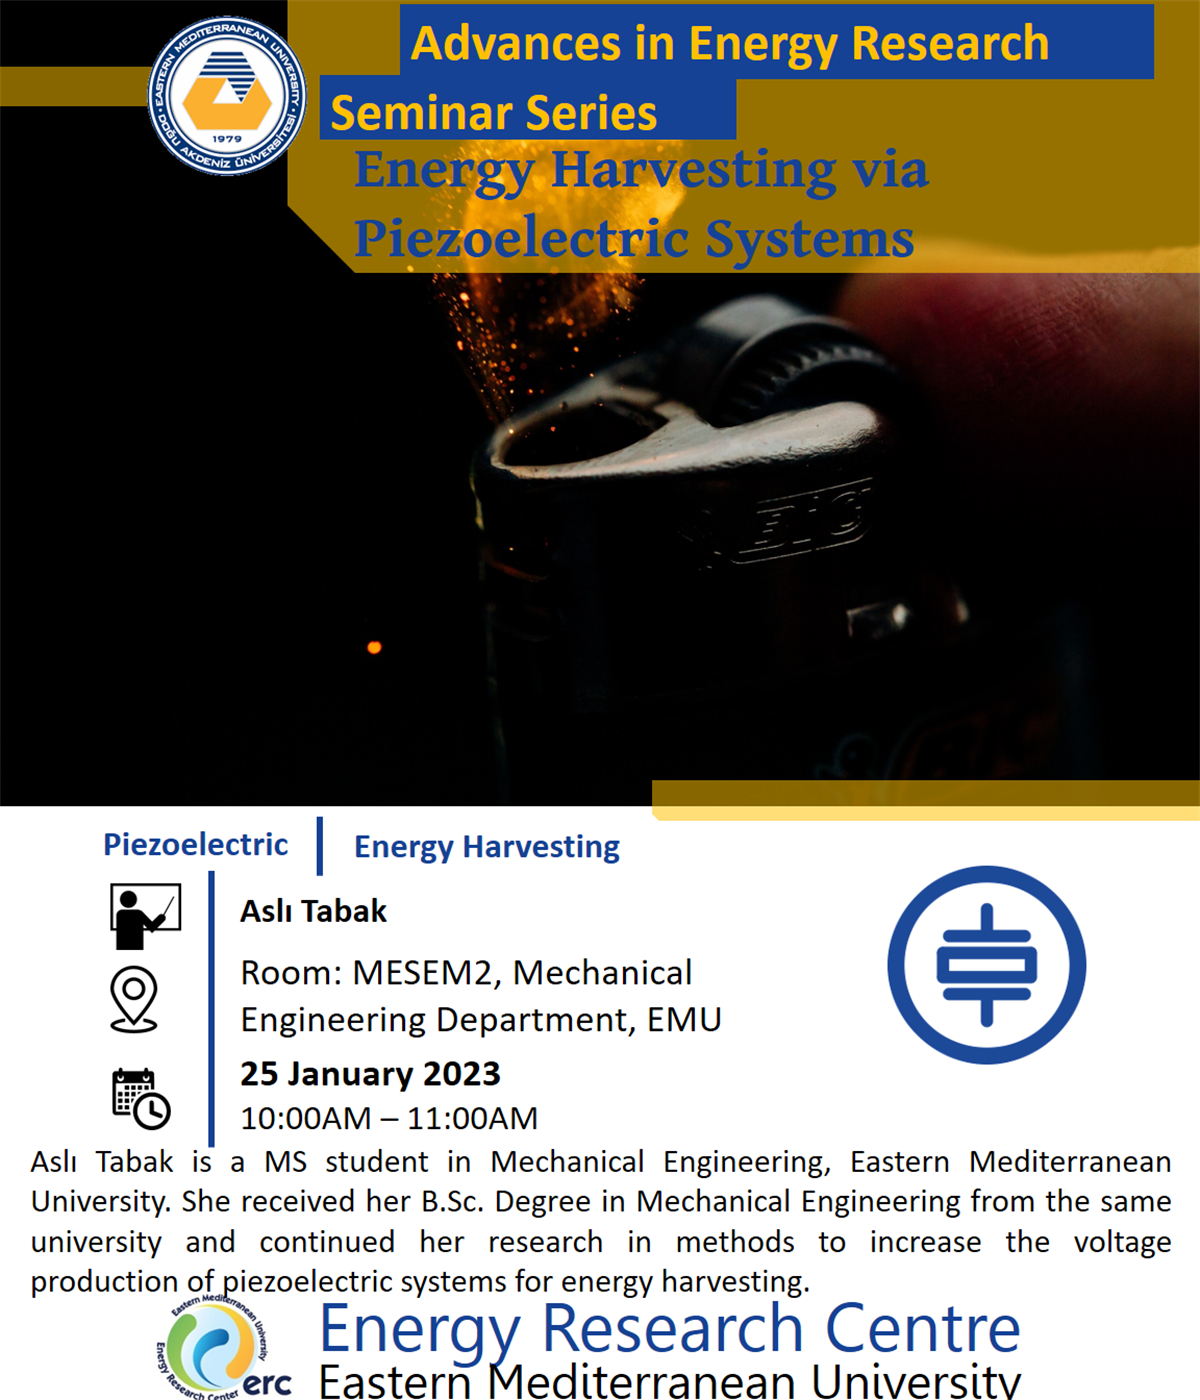 Advances in Energy Research Seminar Series "Energy Harvesting via Piezoelectric Systems"